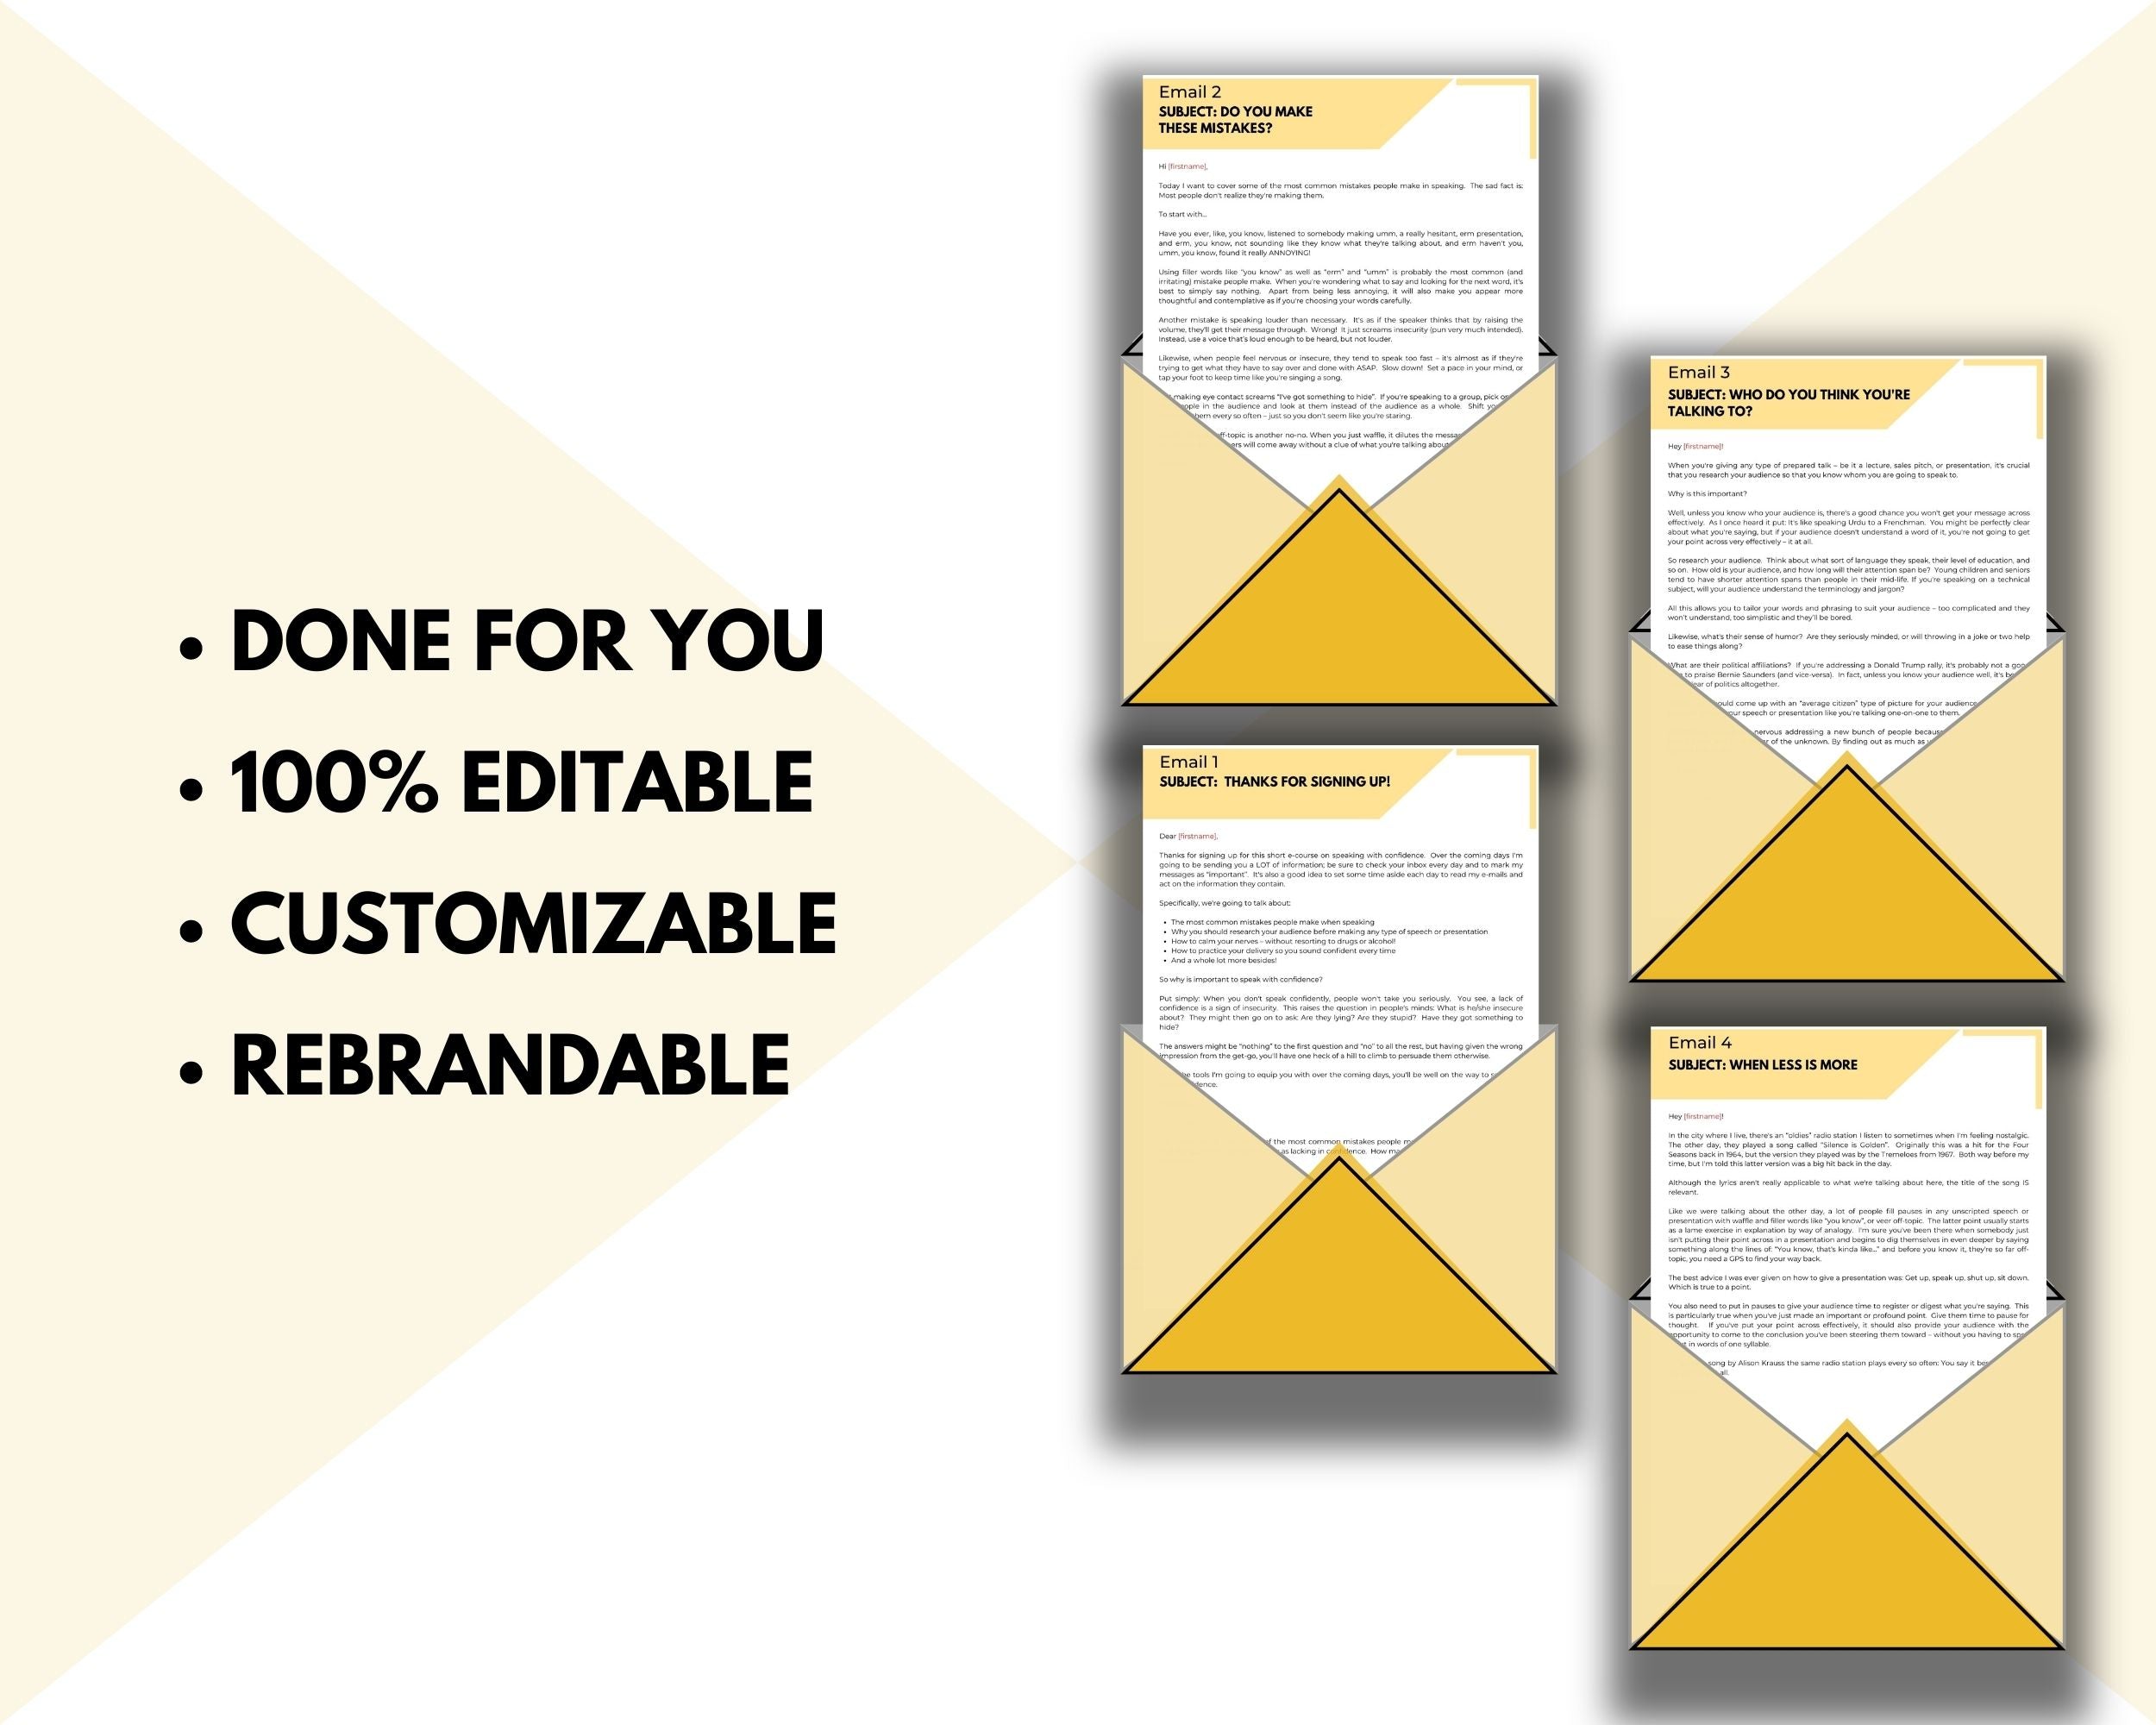 Editable Speak With Confidence Emails | Done-for-You eCourse | Rebrandable Newsletter